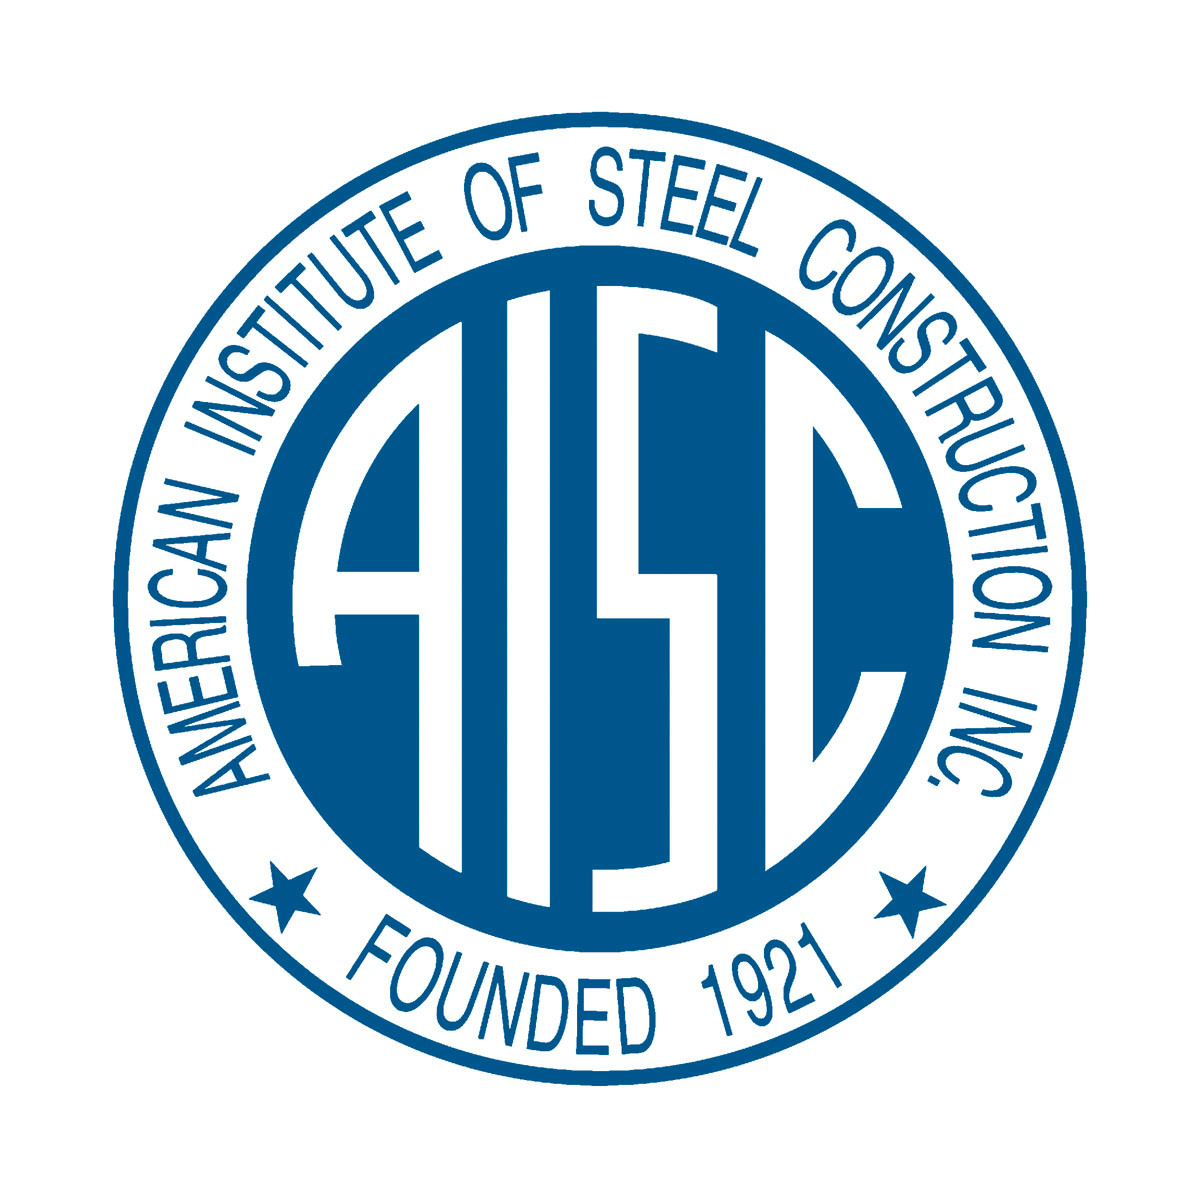 This is the first AISC Logo.